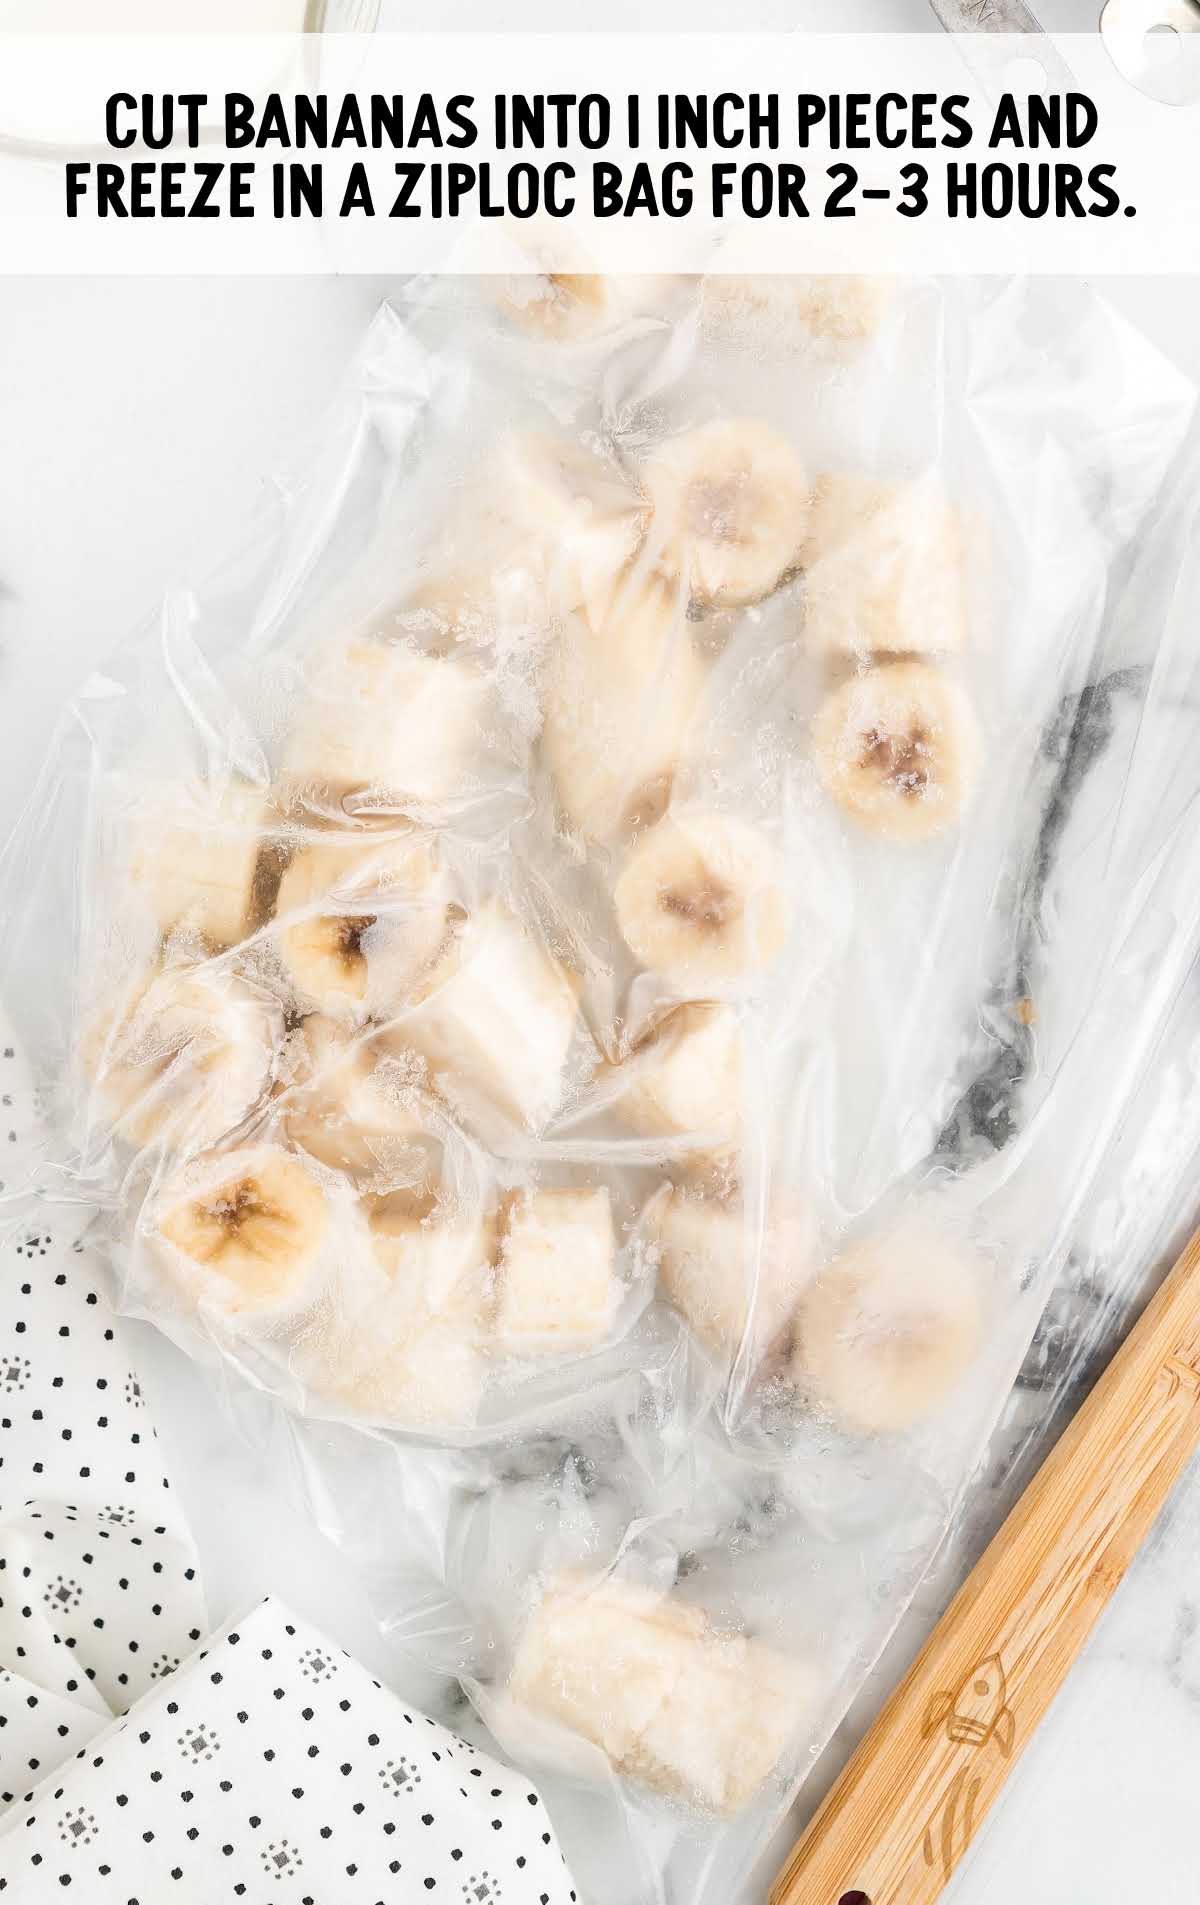 bananas cut into pieces and placed in a ziploc bag